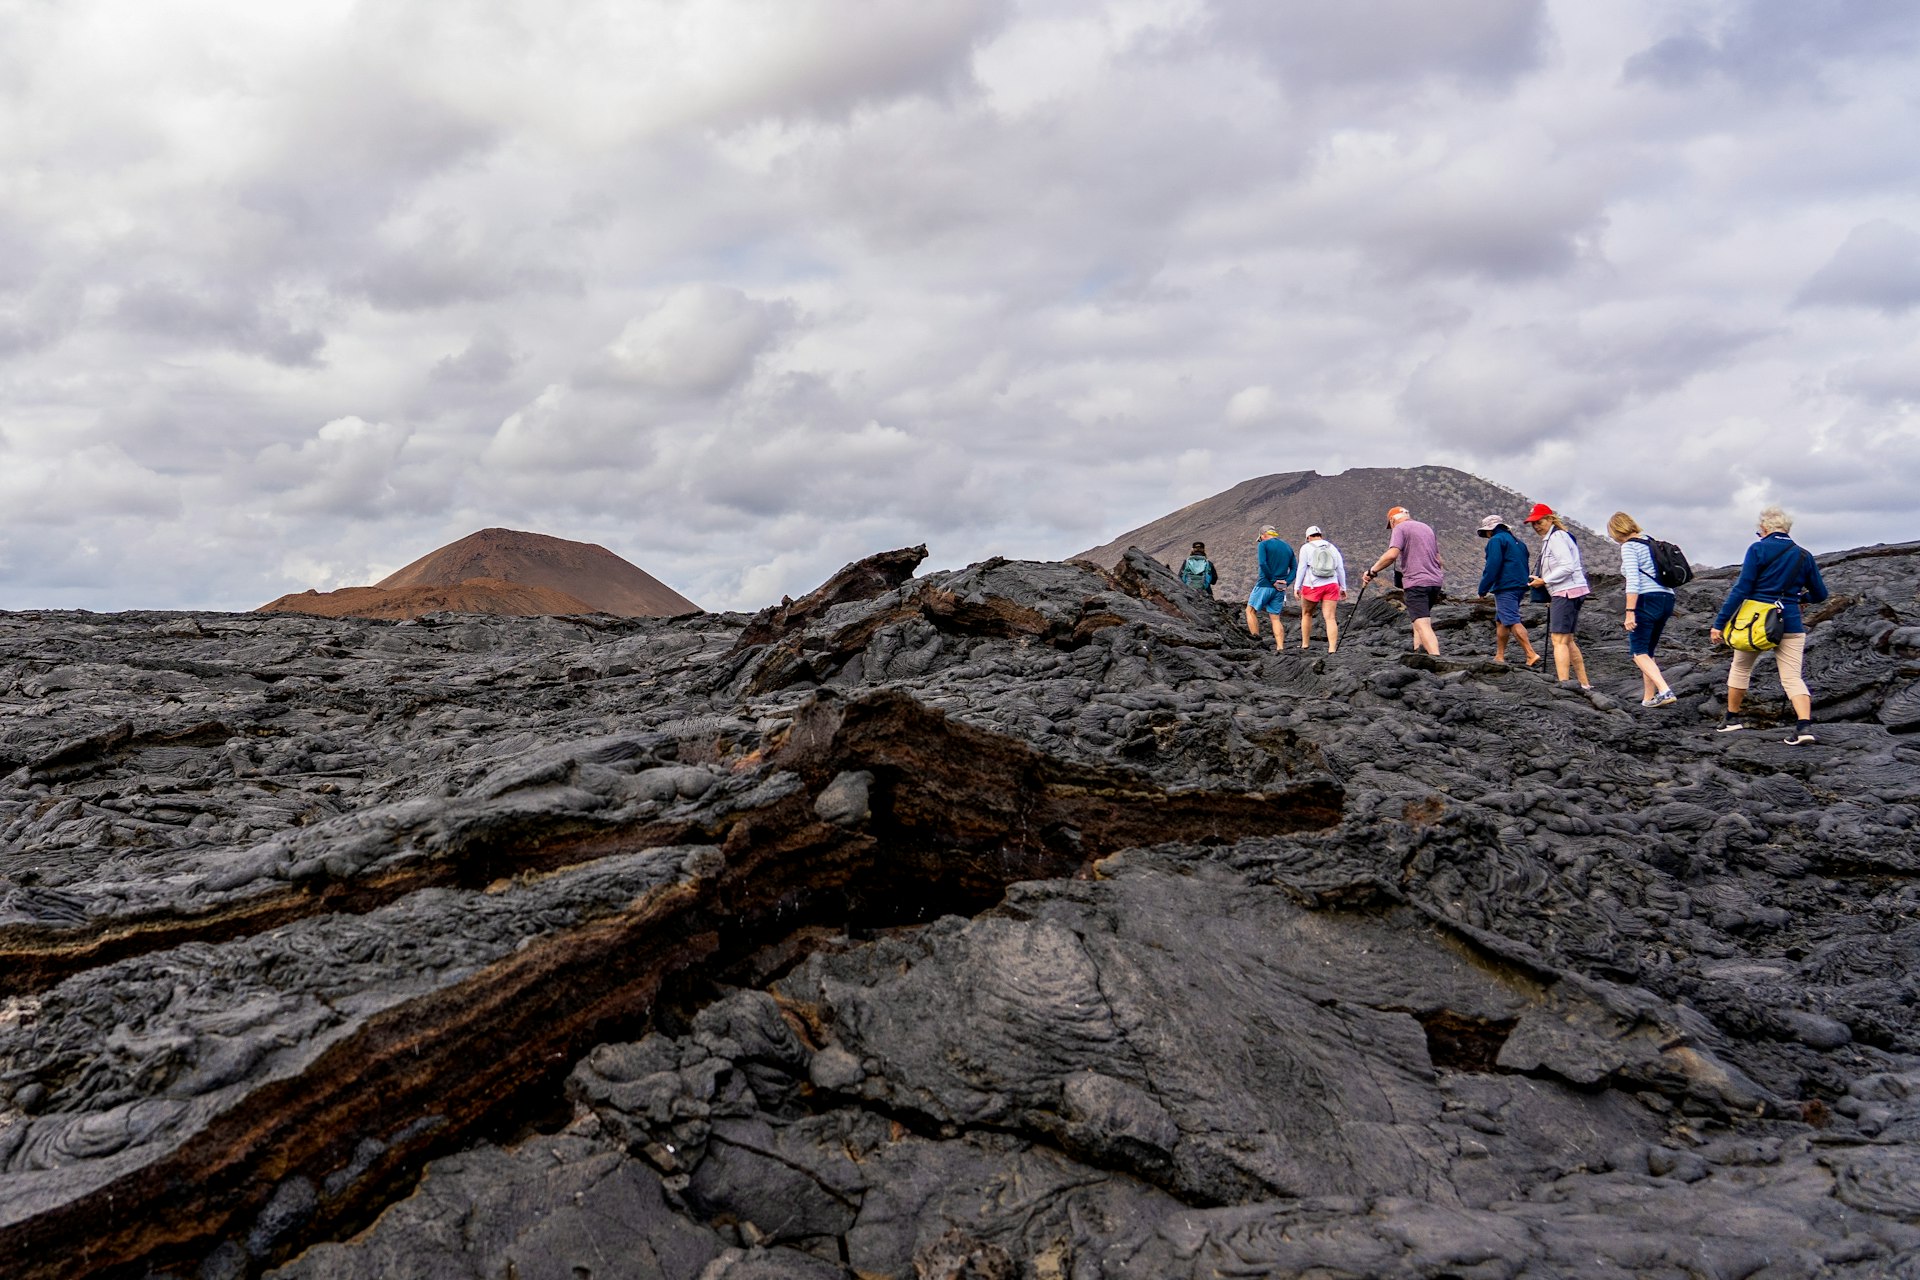 Group of people hiking up a rocky island in the Galapagos